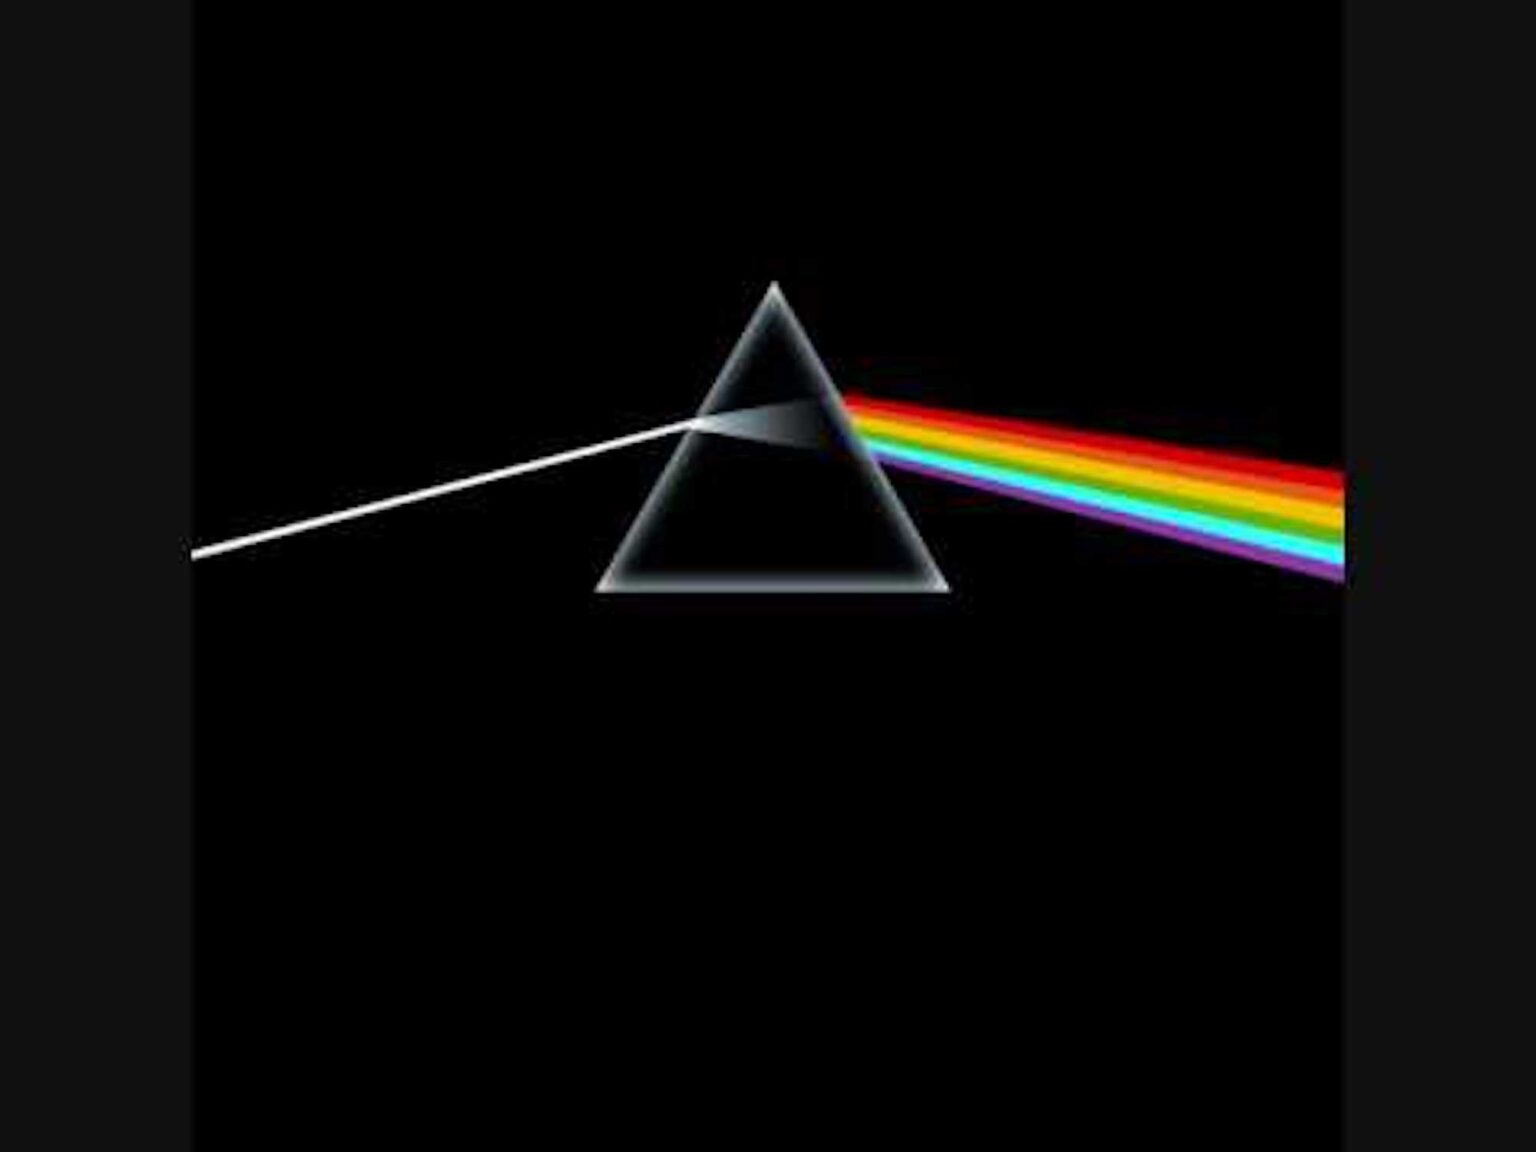 Why is the song "Comfortably Numb" by Pink Floyd becoming a meme over on Twitter? See the best examples of the new meme.